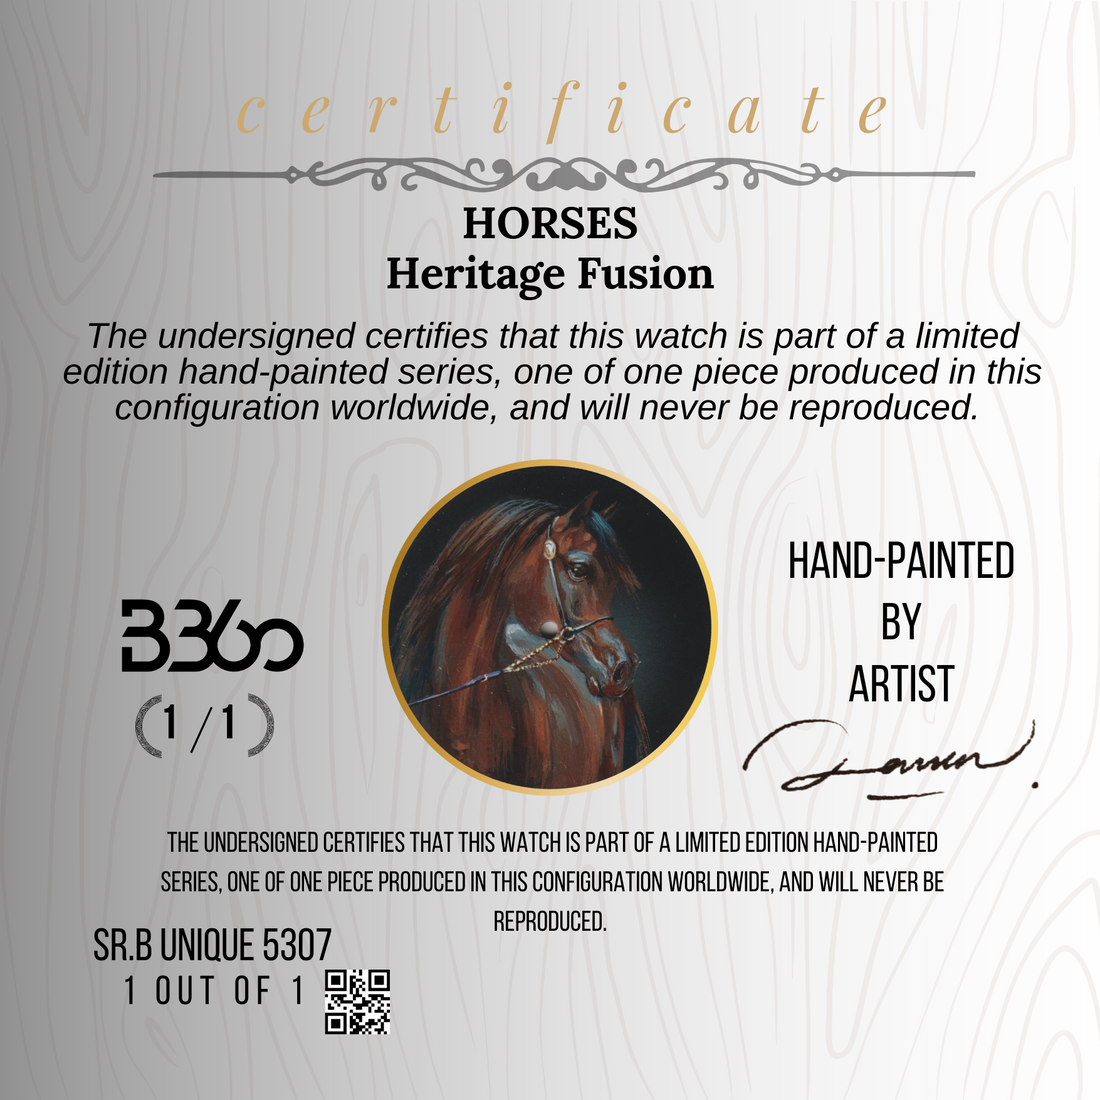 B360-unique-Wadee Al Shaqab-Hand painted-Horse- SR. 5307 (1 out of 1)